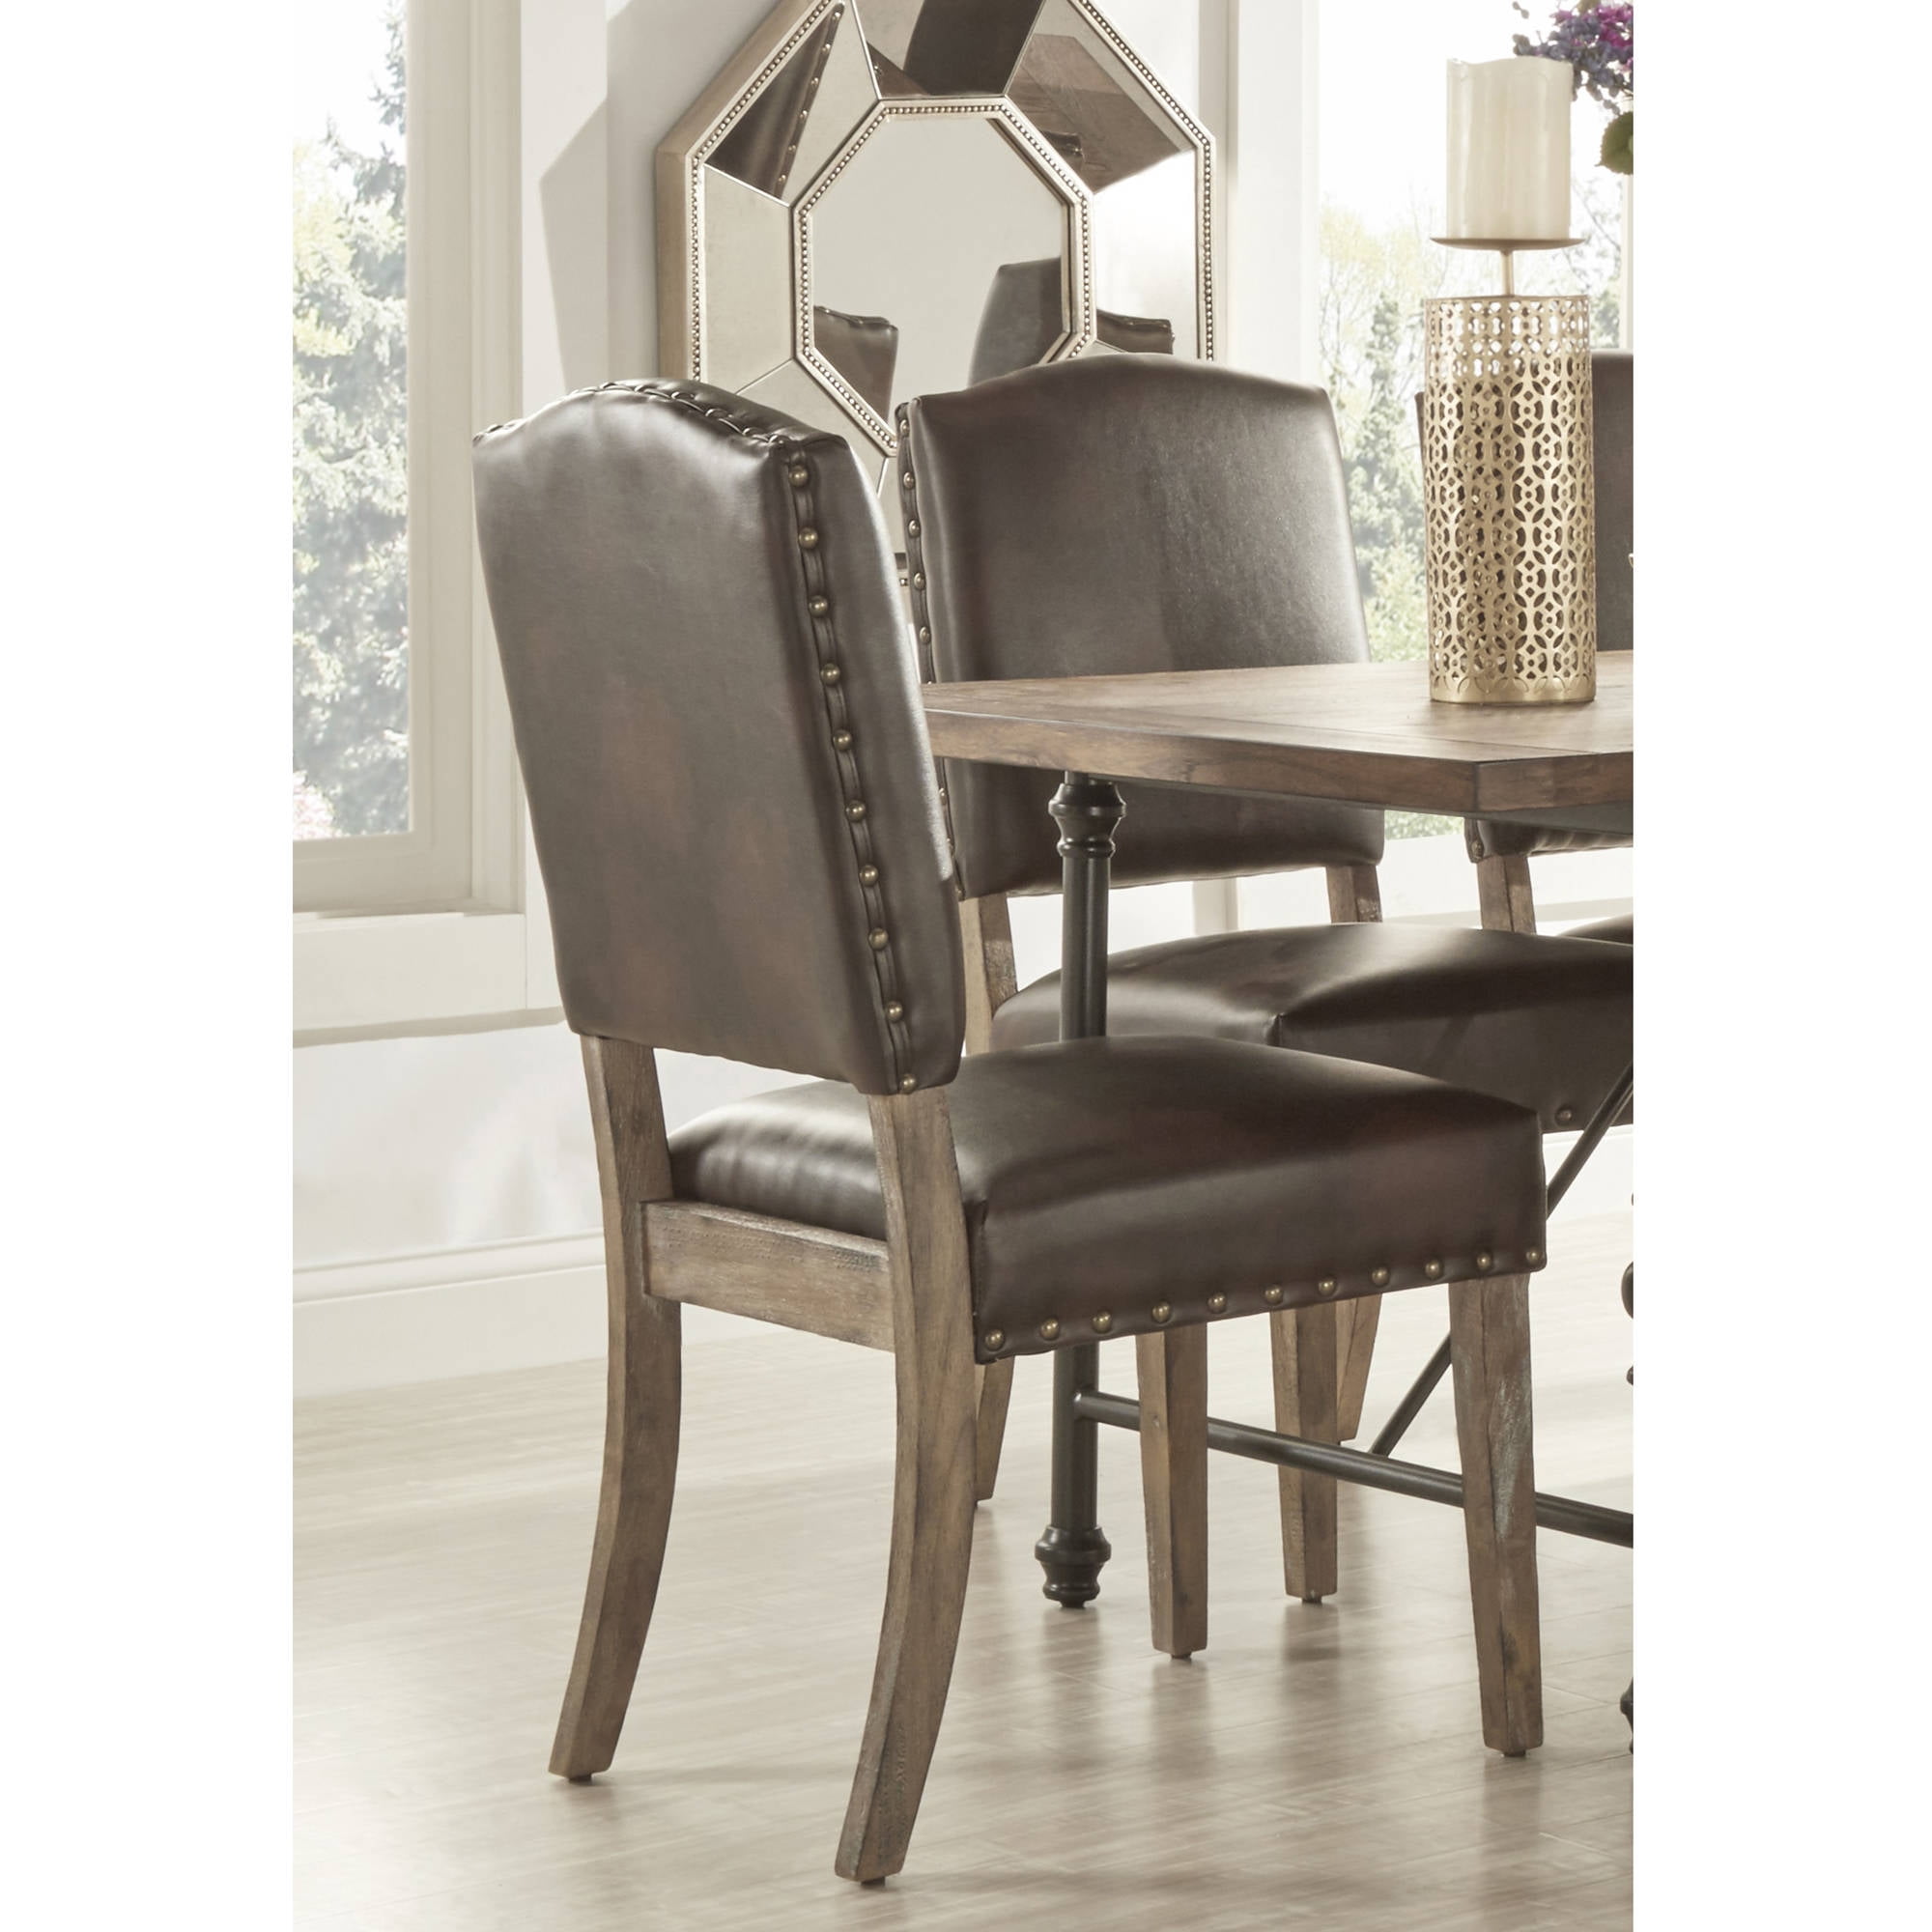 Weston Home Nailhead Upholstered and Wood Dining Chair